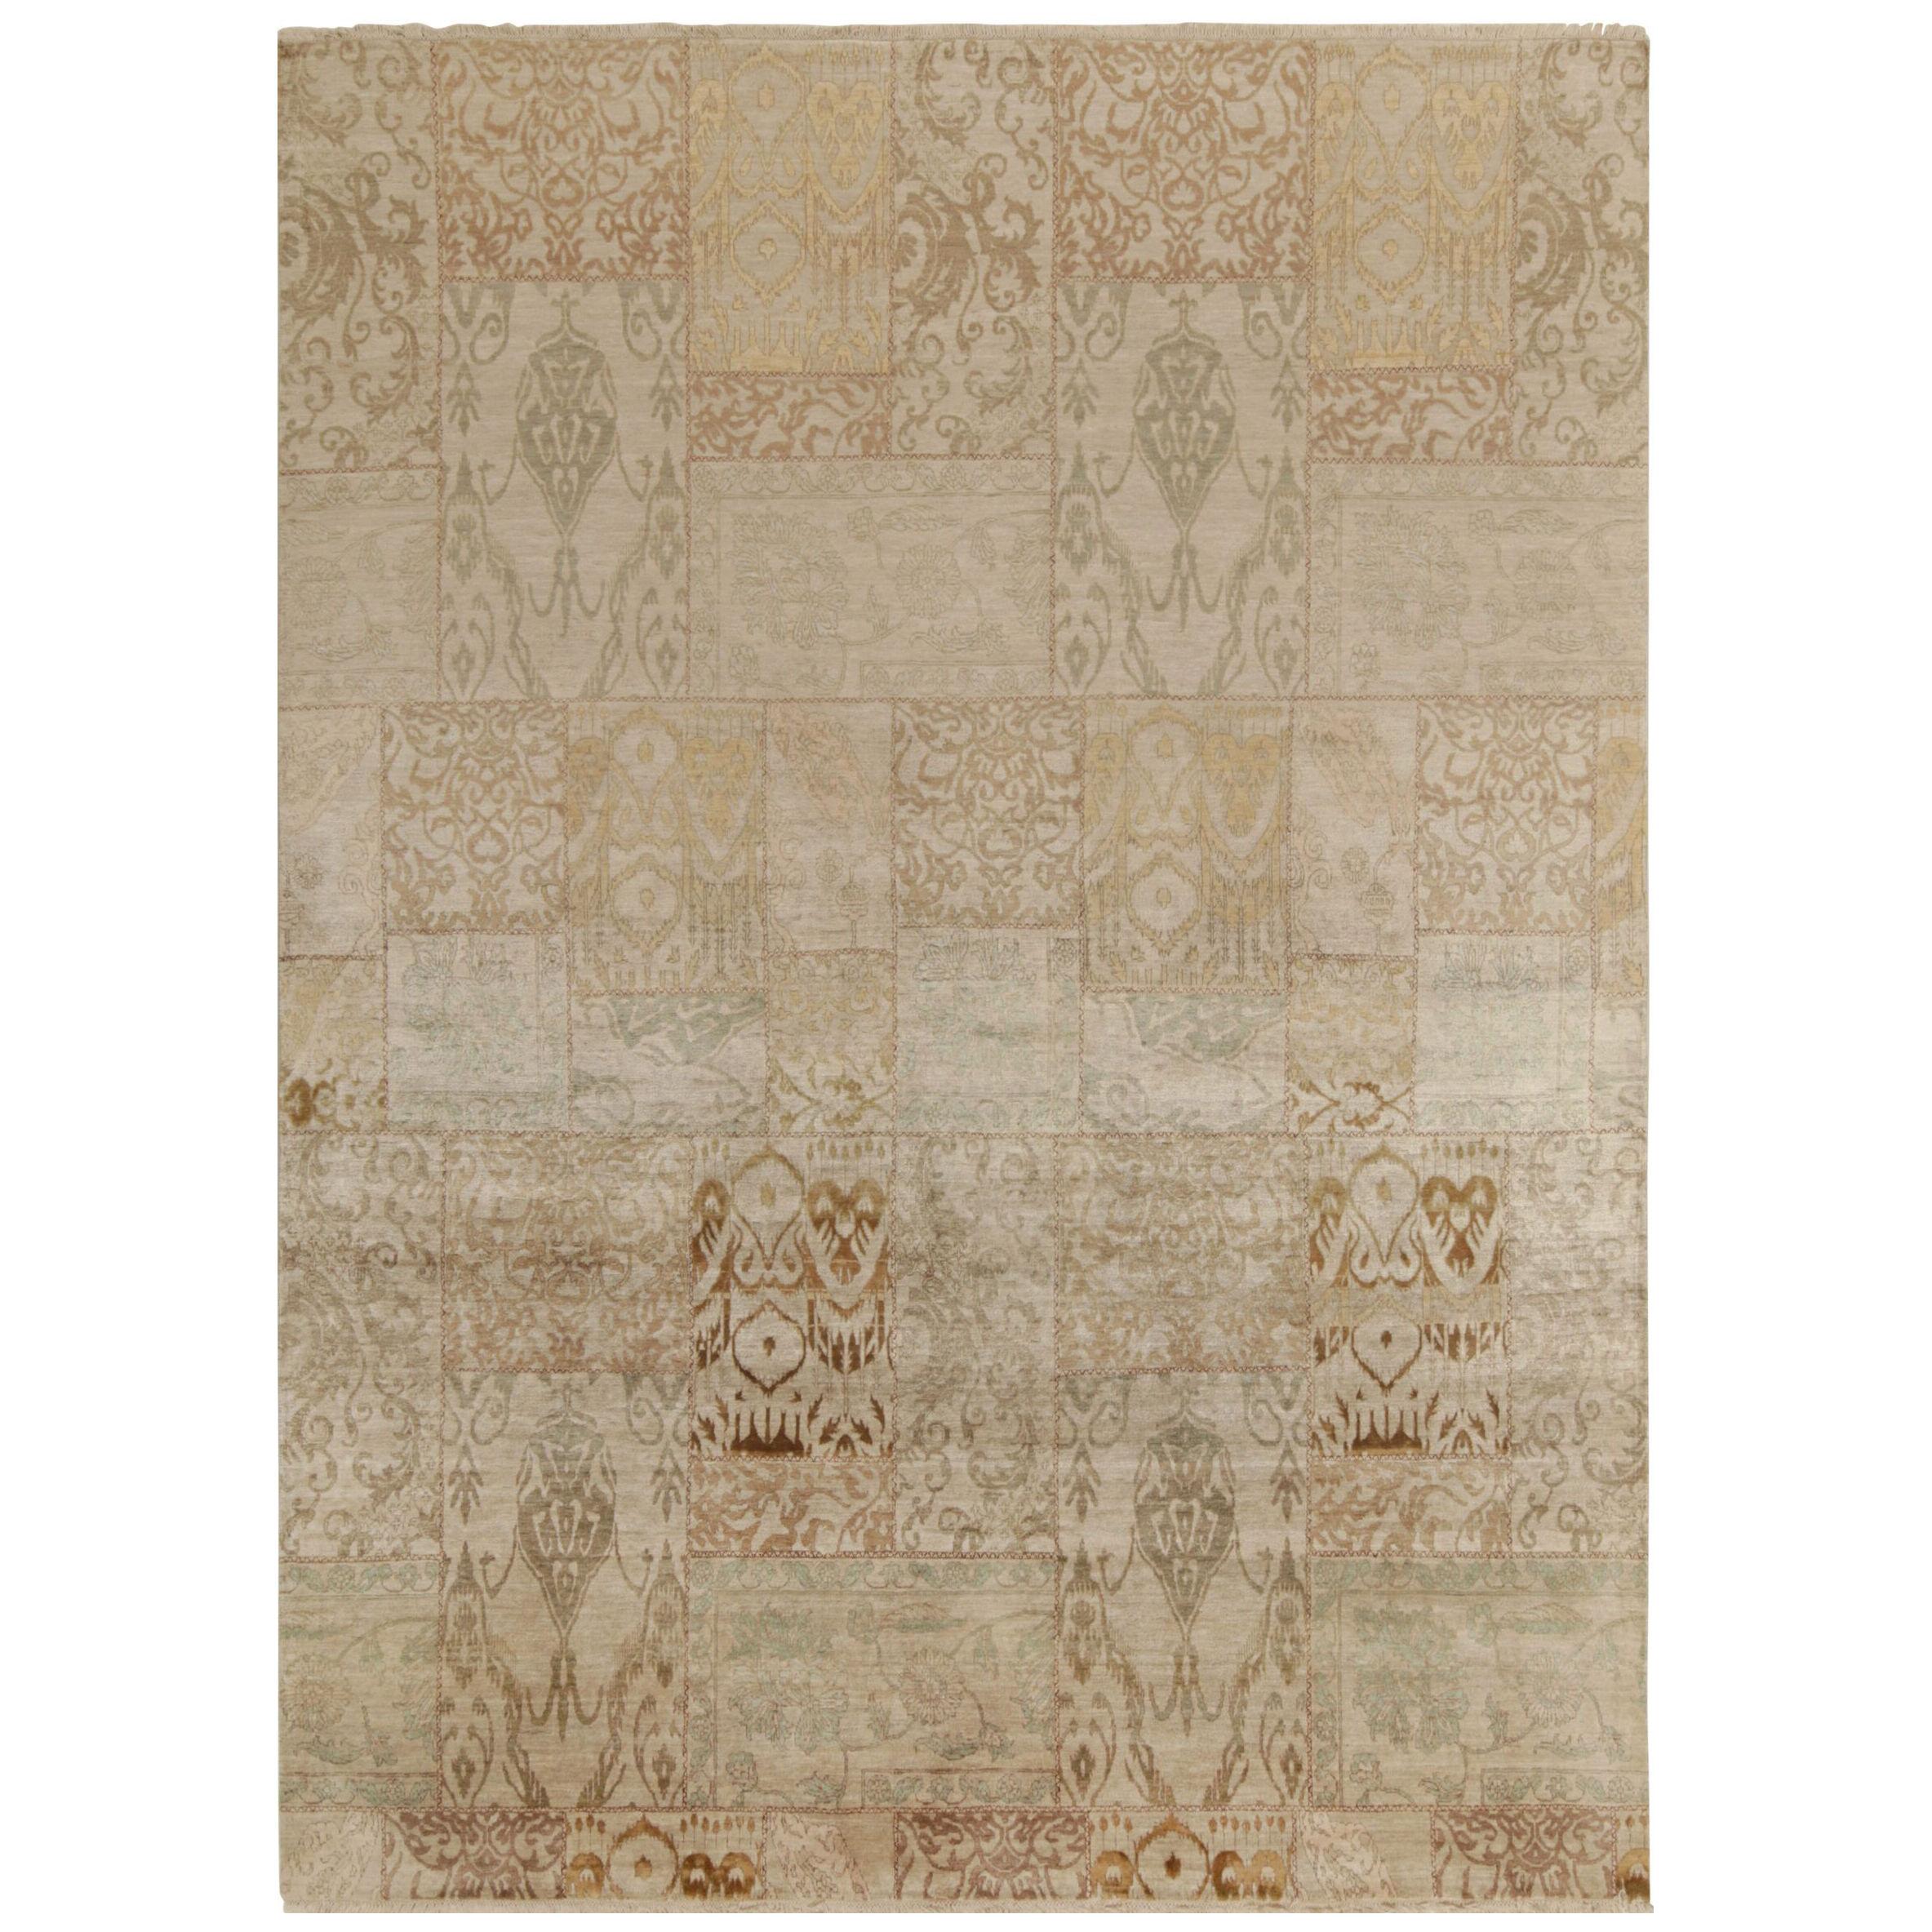 Rug & Kilim’s Classic Style Rug in Beige-Brown, Gold Ikats Pattern